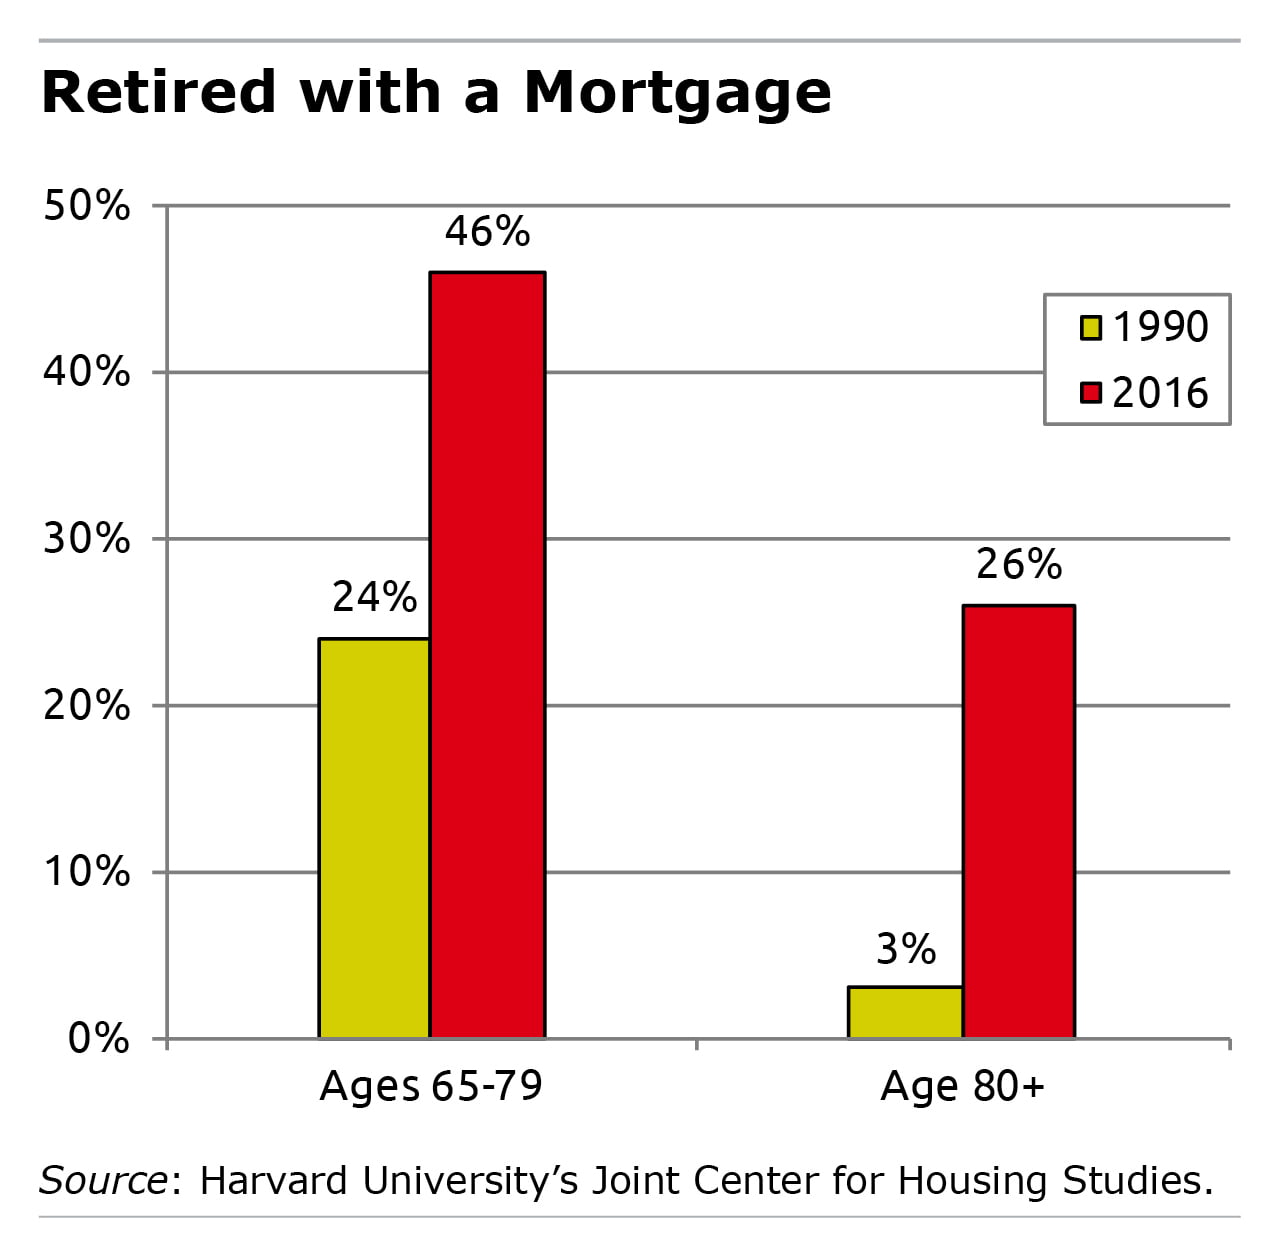 Bar graph showing the number of retirees with mortgages